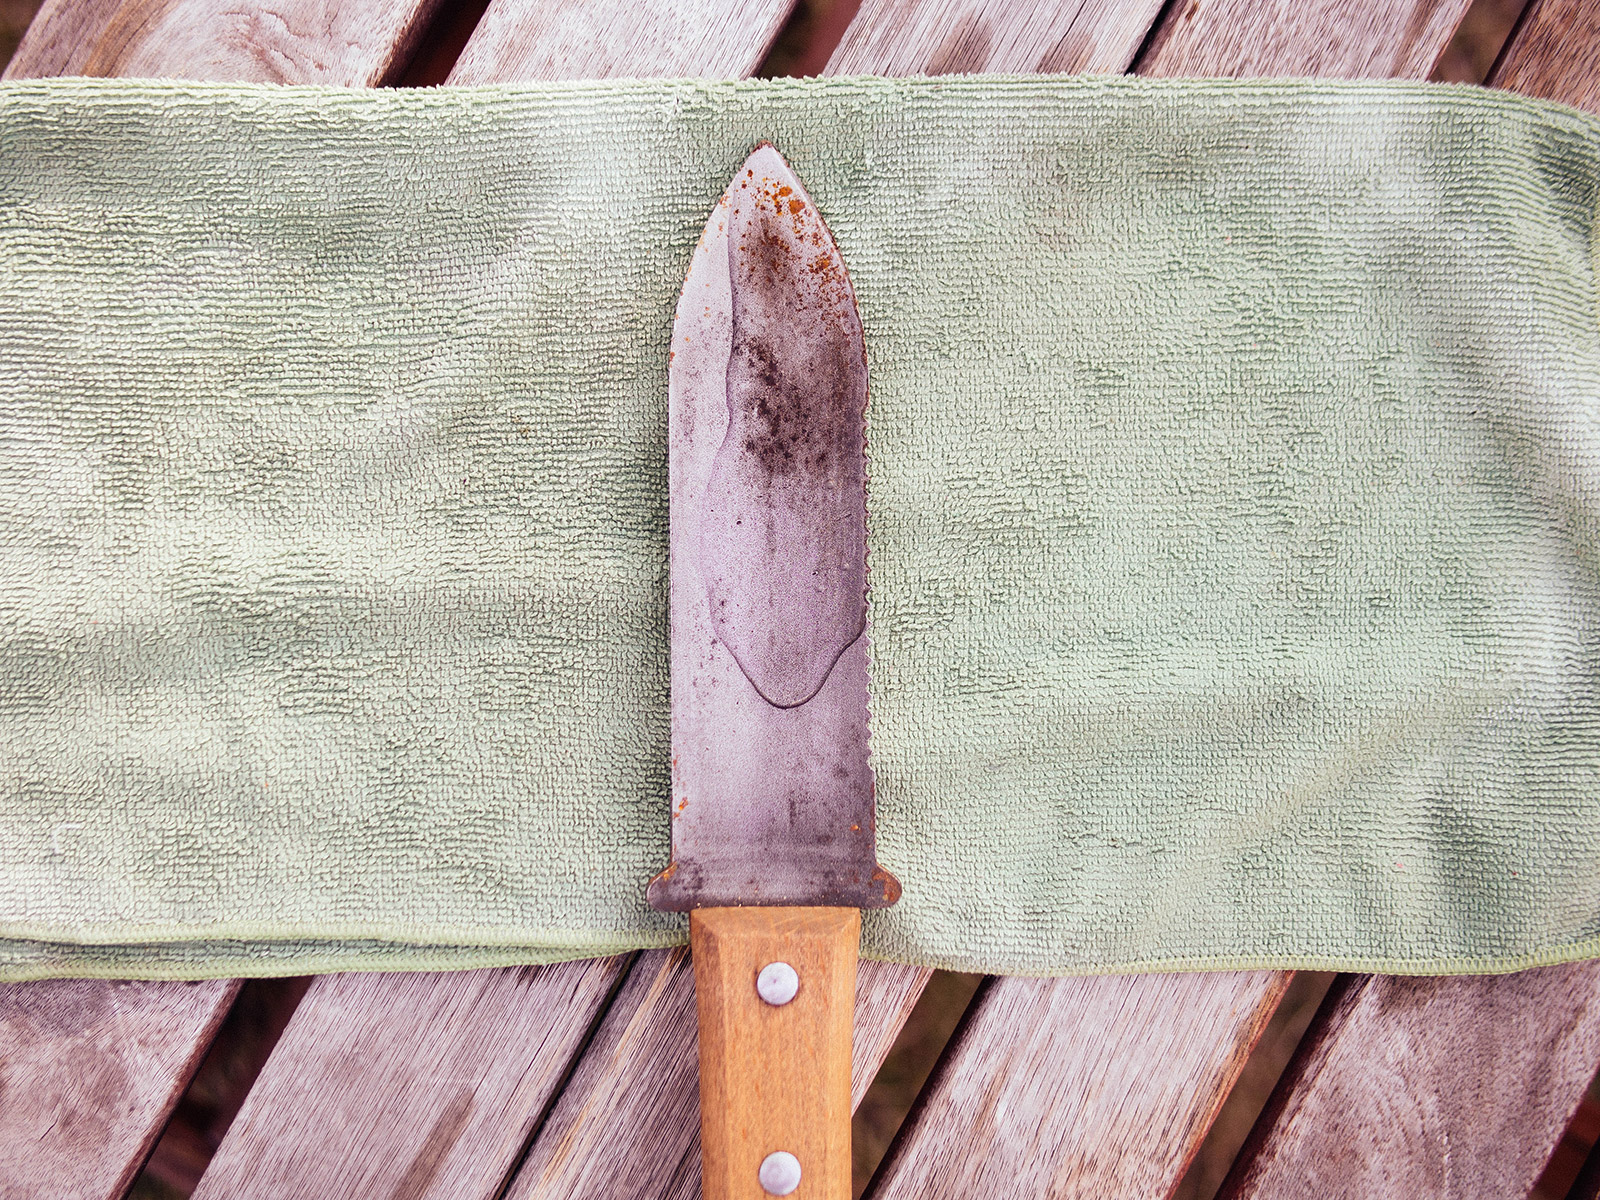 Rusty hori hori knife laying on top of a green vinegar-soaked towel